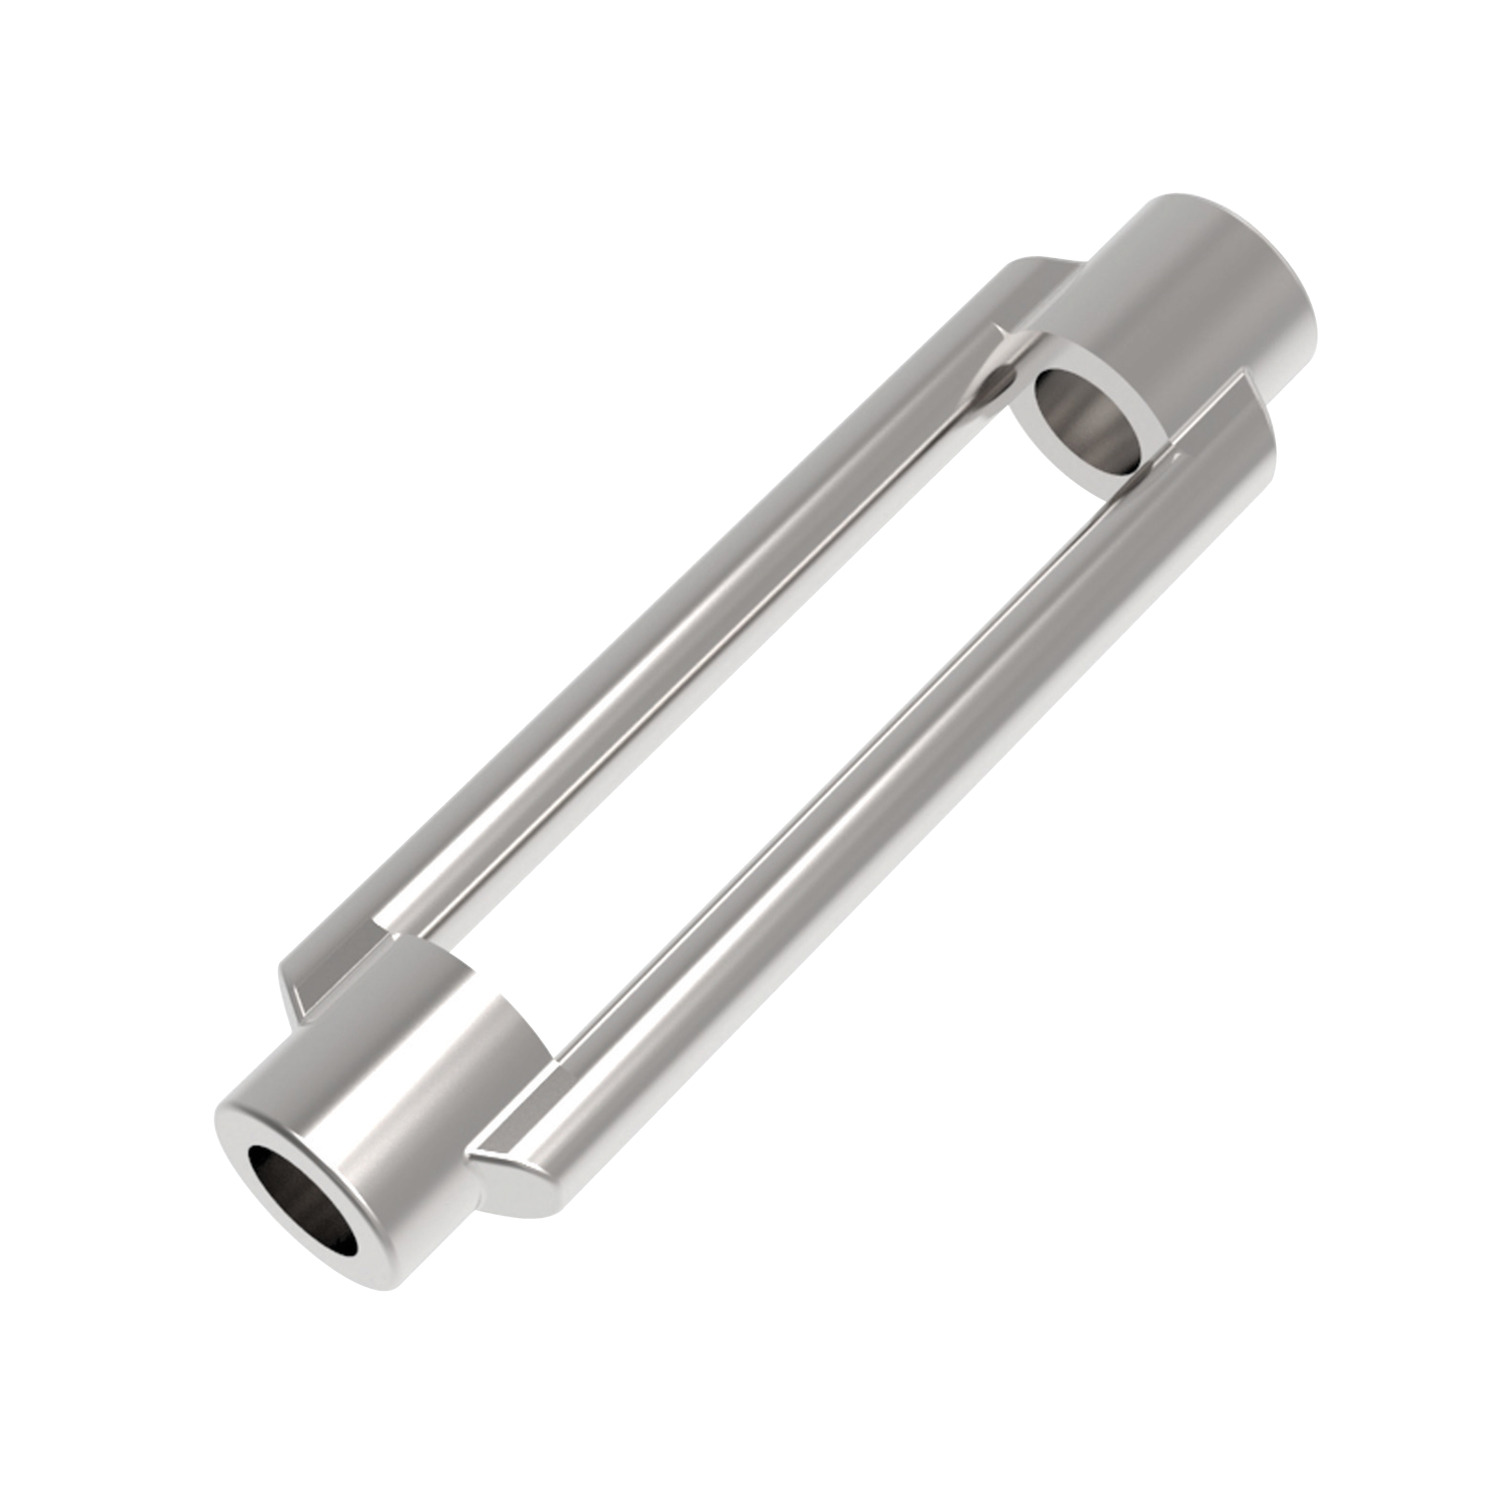 R3830.030-ZP Turnbuckles M30 steel Not to be used for lifting unless SWL marked.